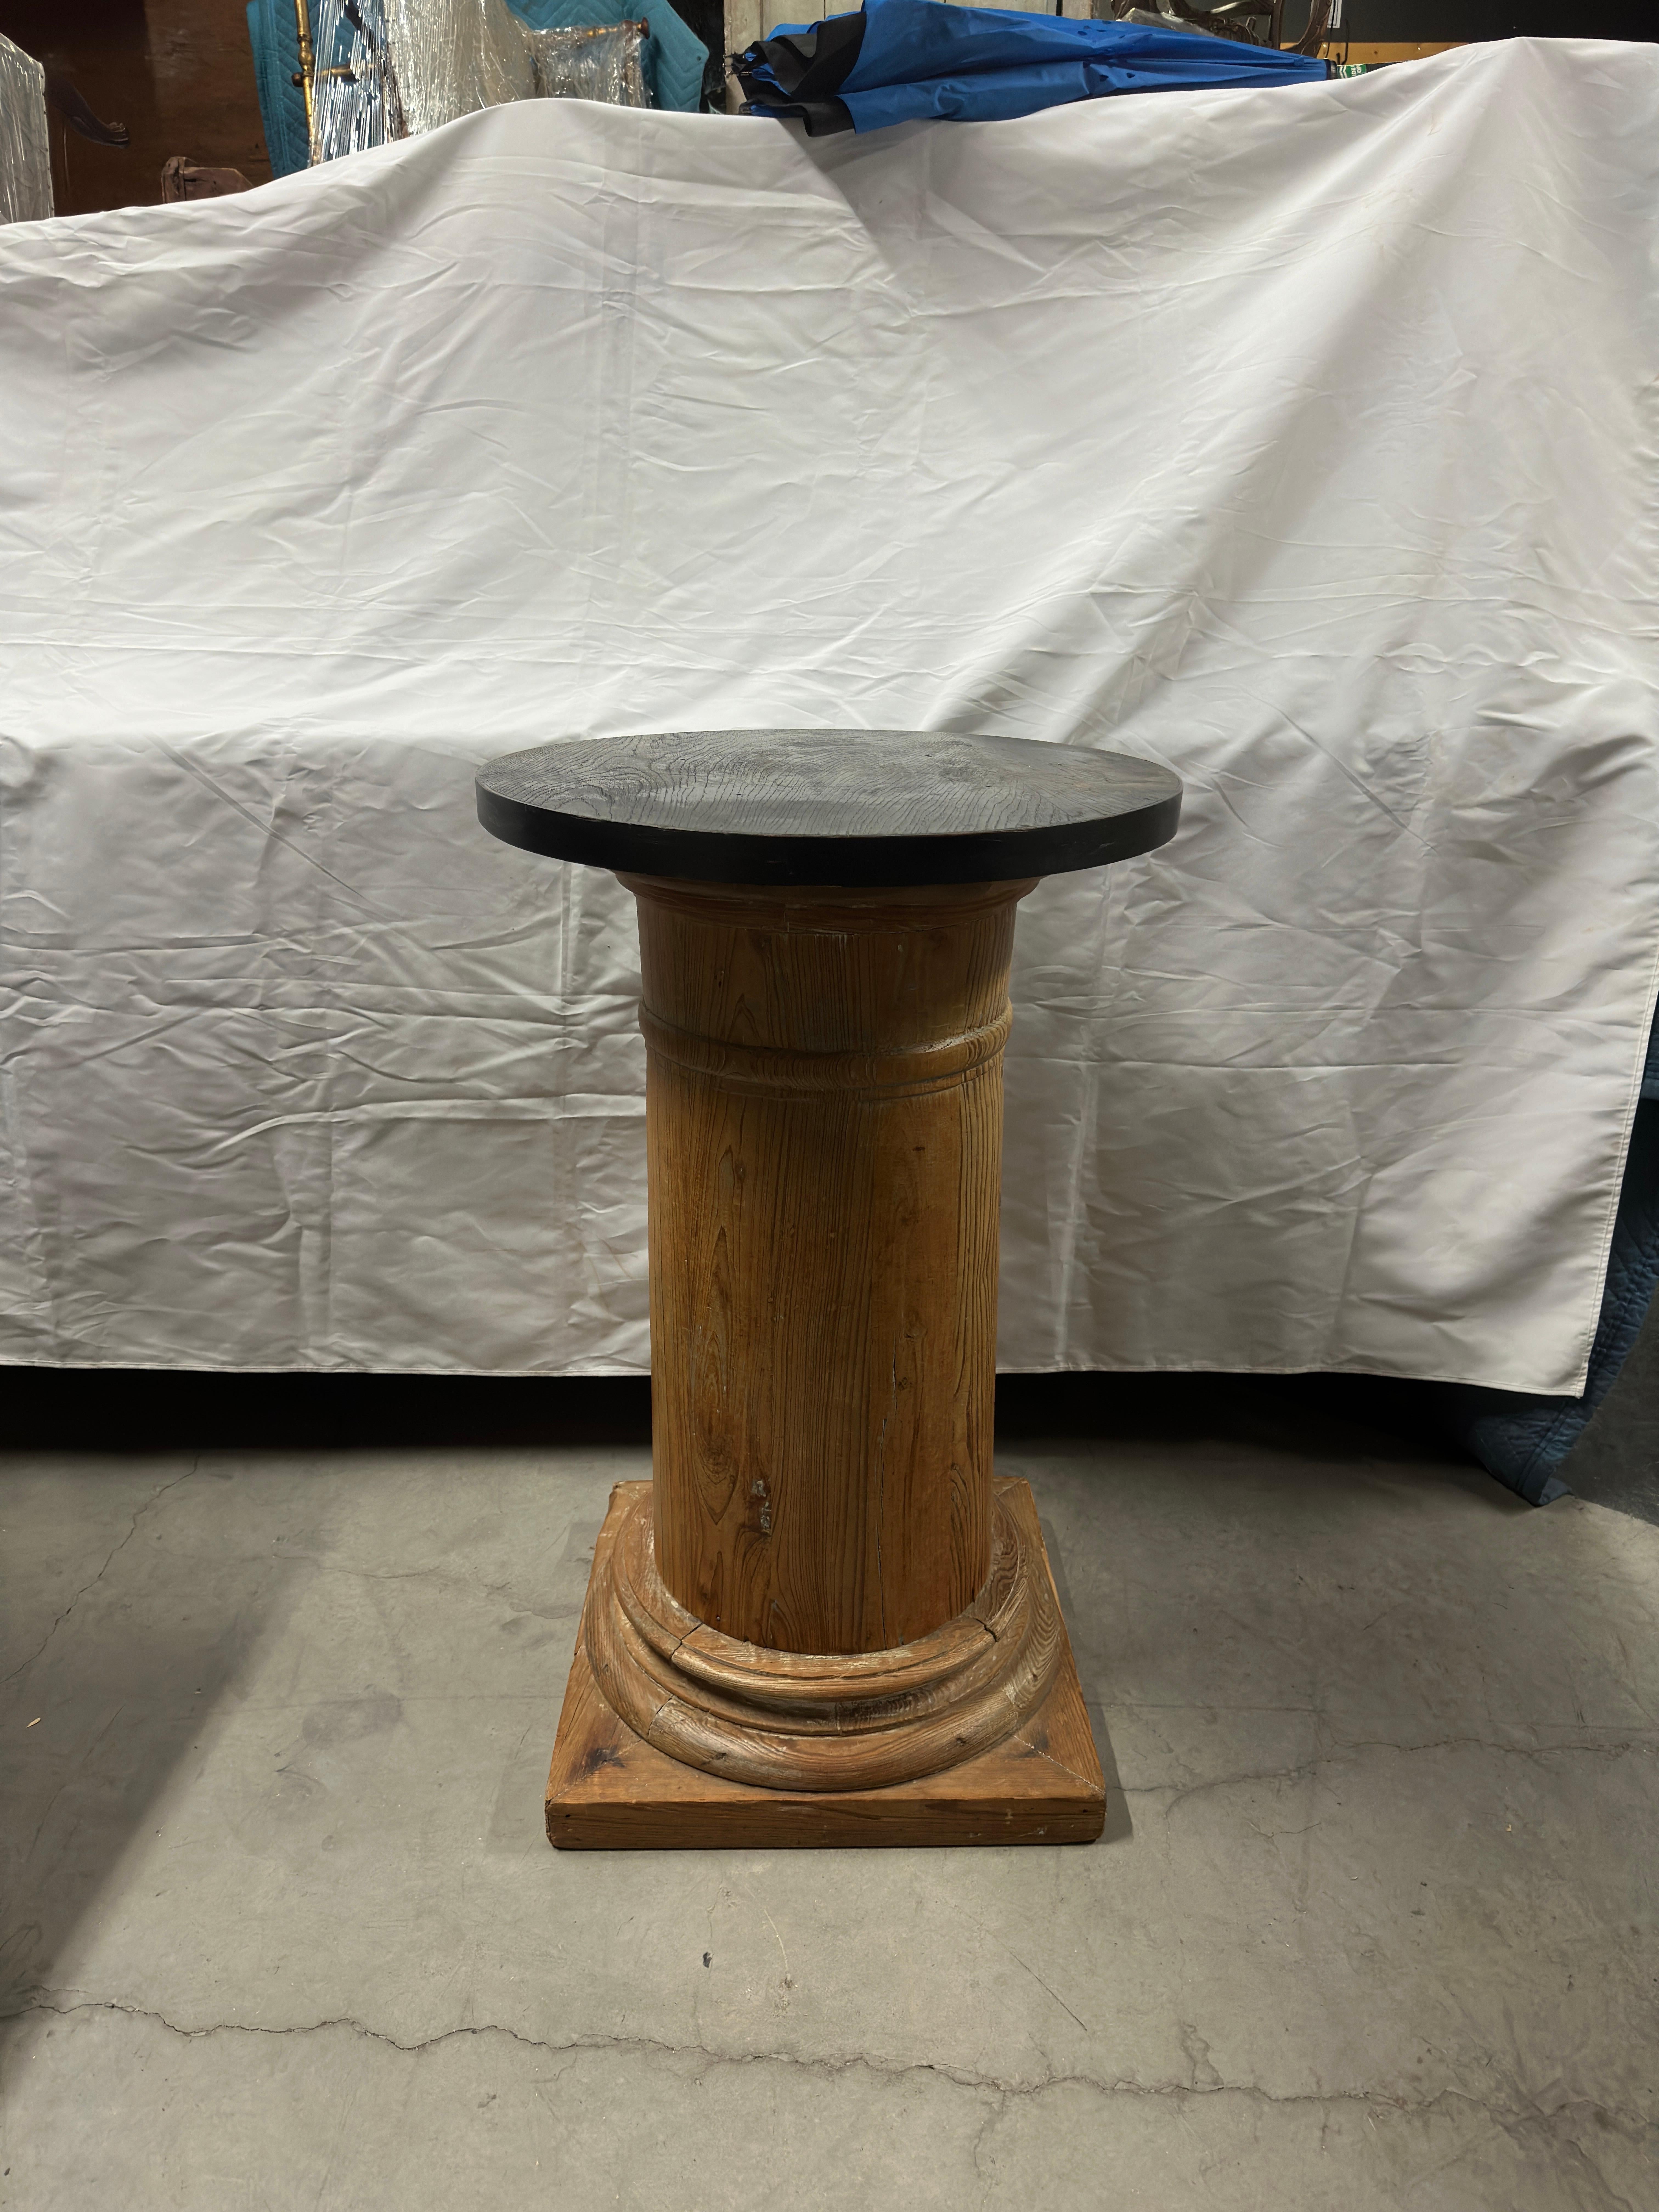 The 20th Century English Pine Column is a unique piece characterized by its distinctive features. It stands tall with a black painted round top, creating a striking contrast against the natural pine wood. The square base provides stability and